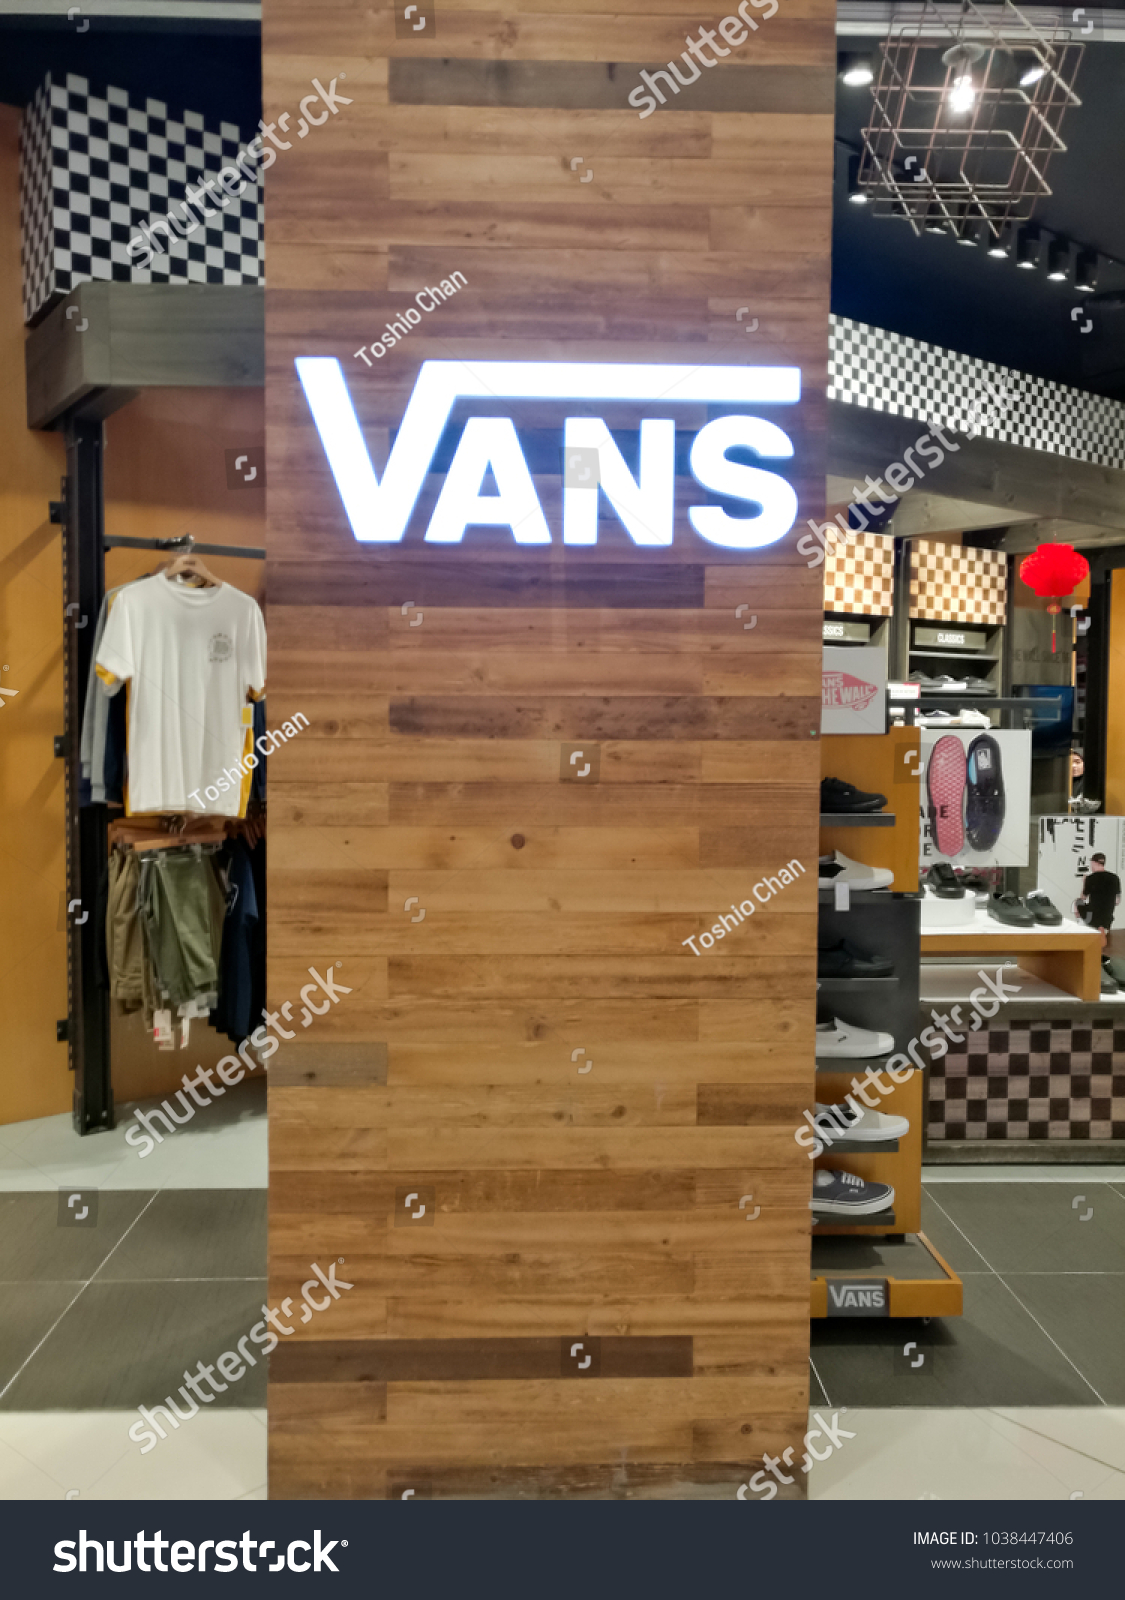 vans boutique in malaysia